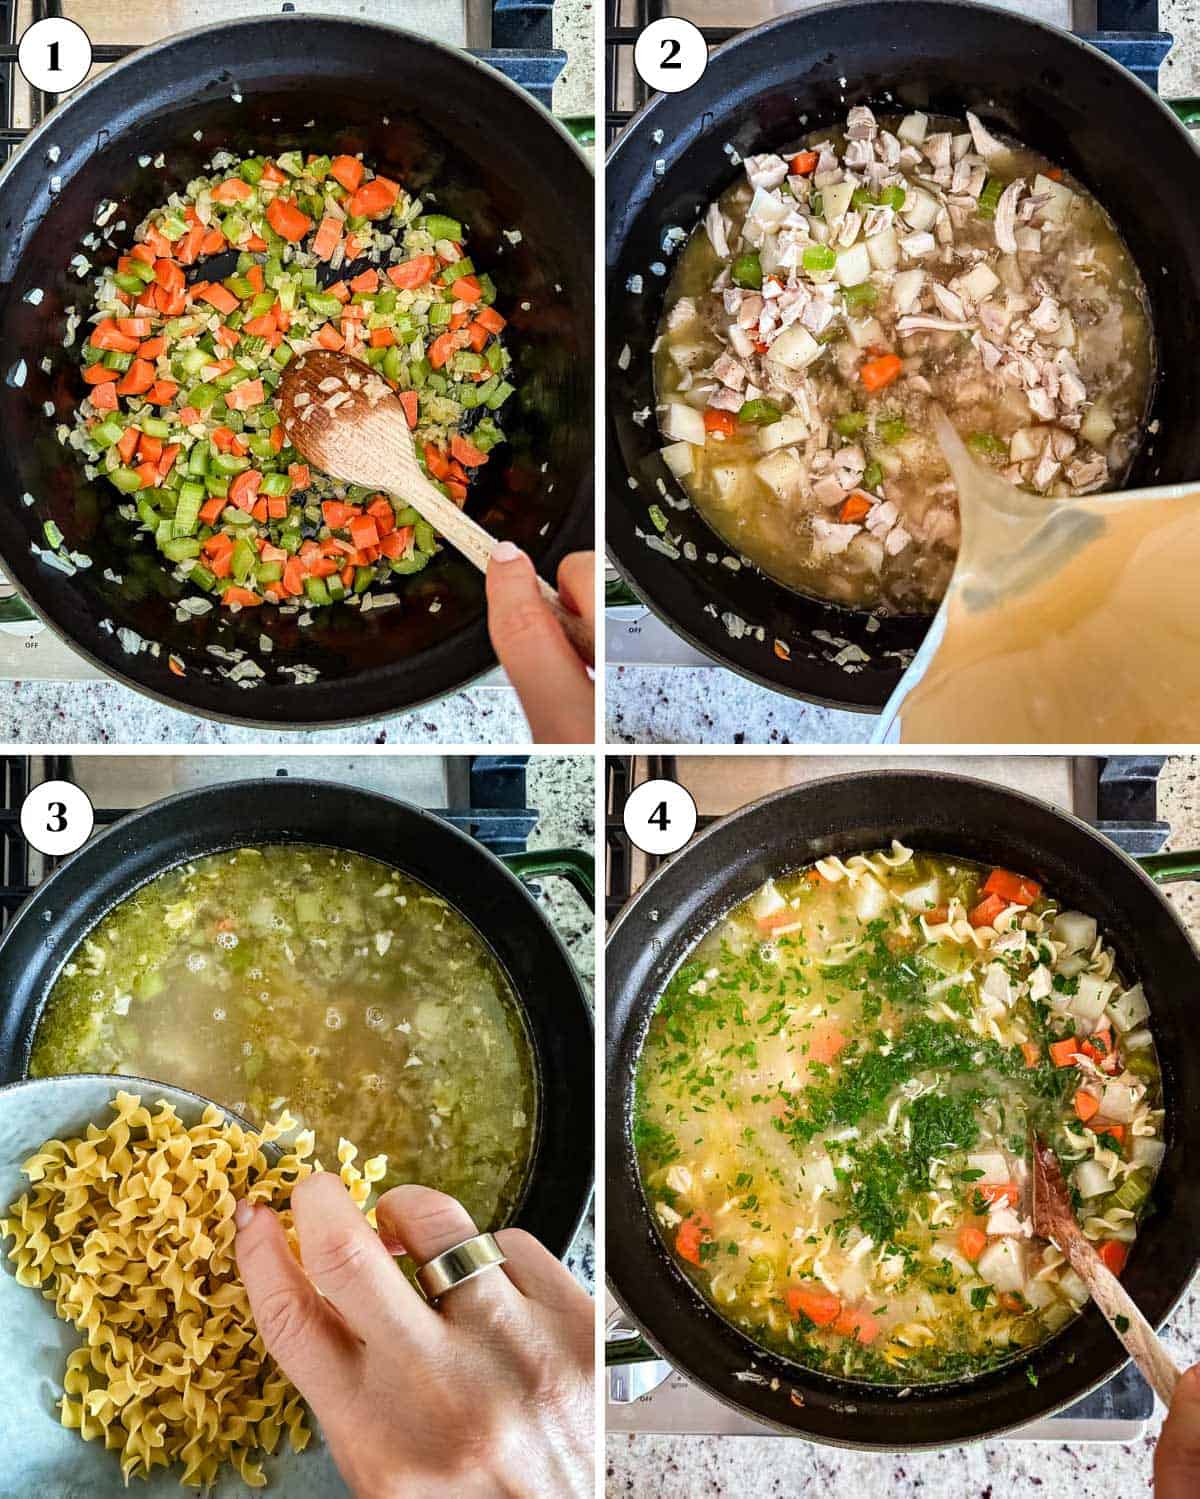 A collage of photos showing how to make the recipe.